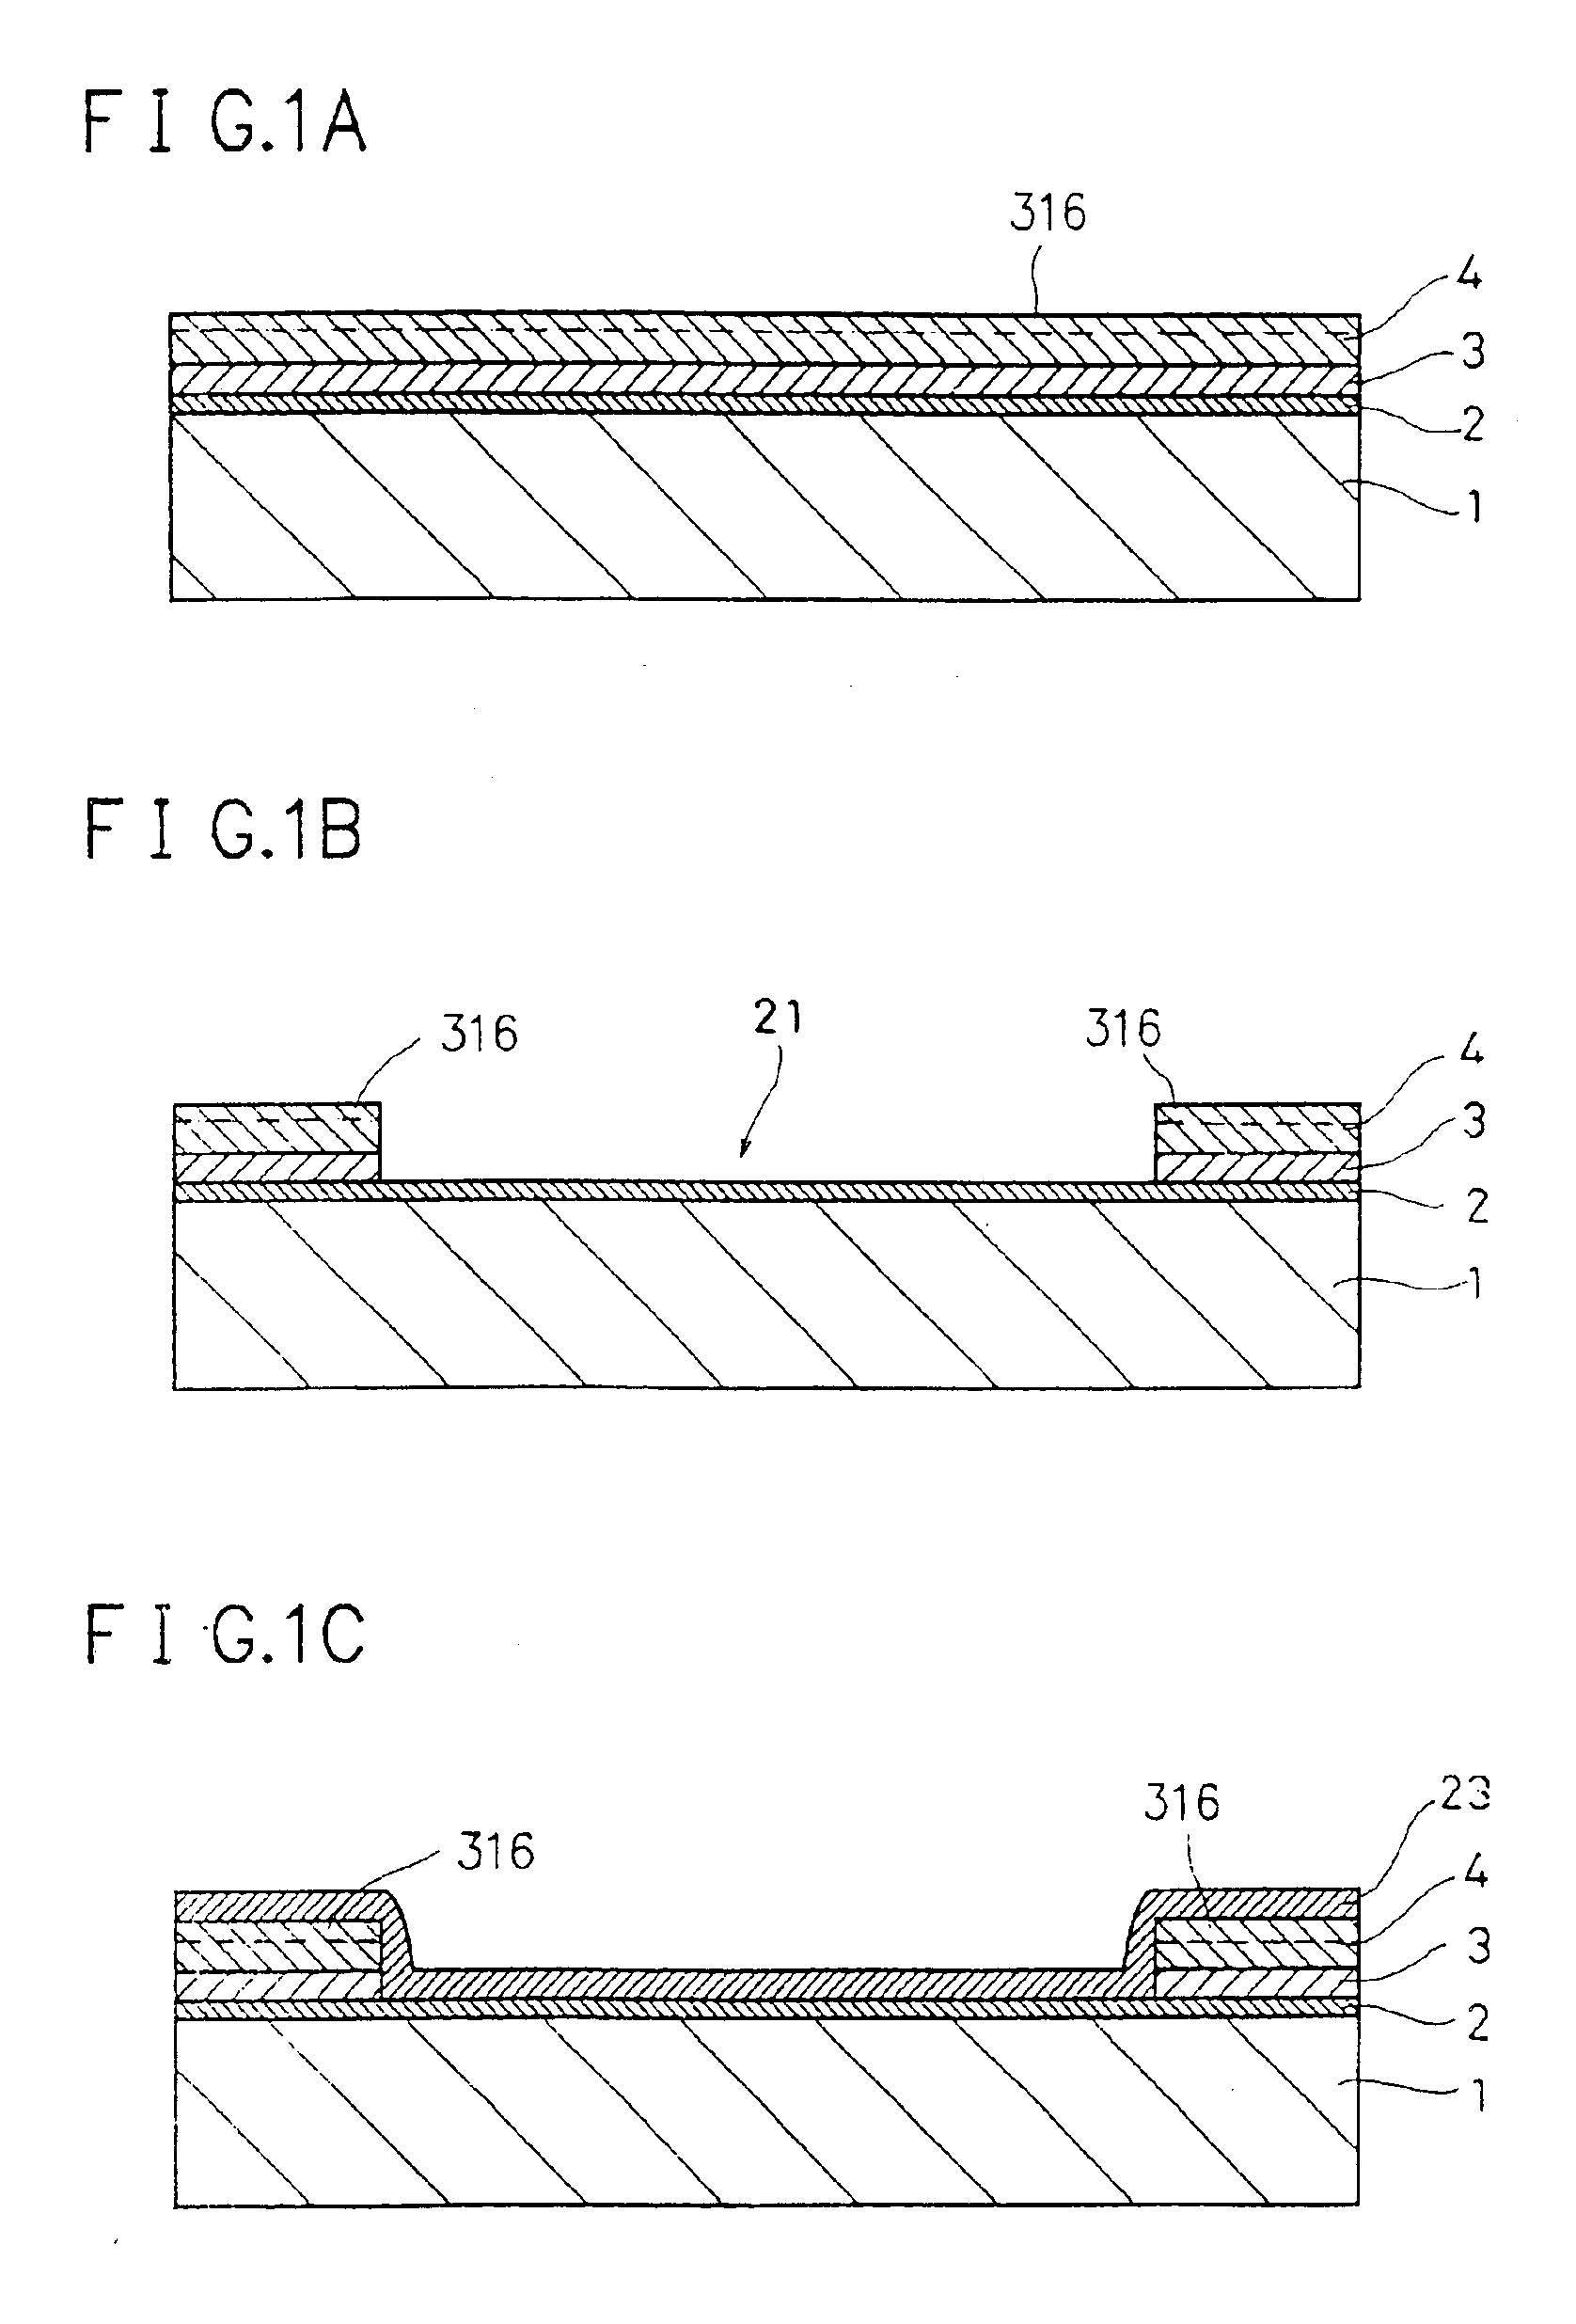 Semiconductor device, a method of manufacturing the semiconductor device and a method of deleting information from the semiconductor device